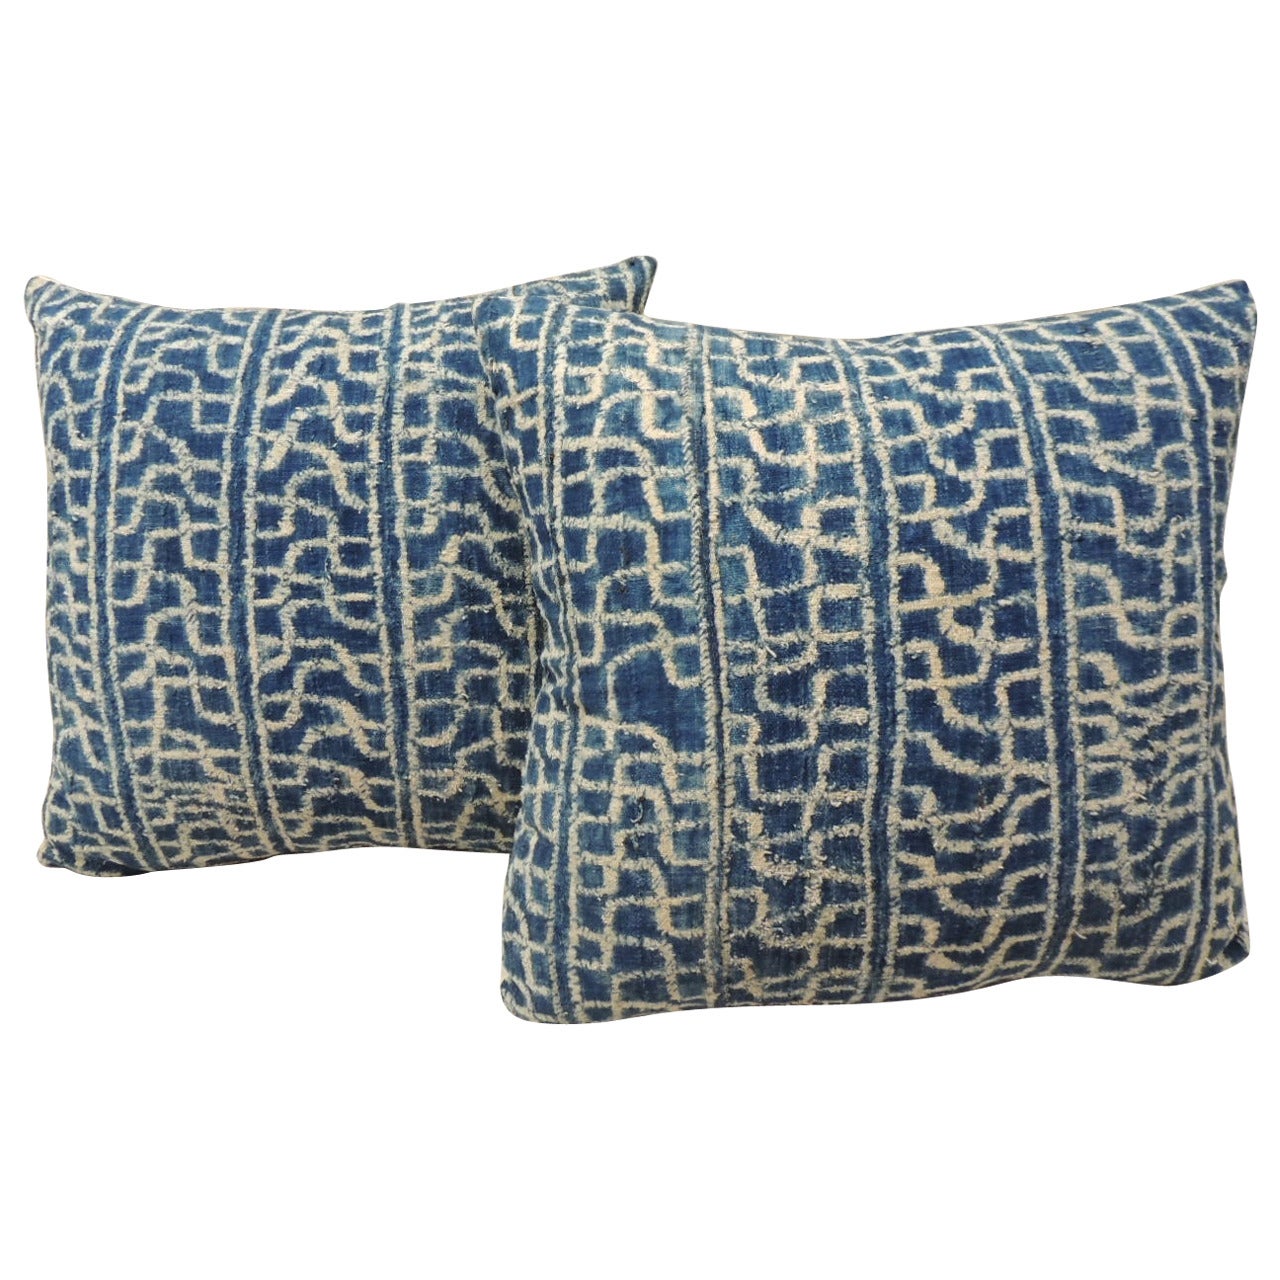 Pair of African Blue and Natural Pillows